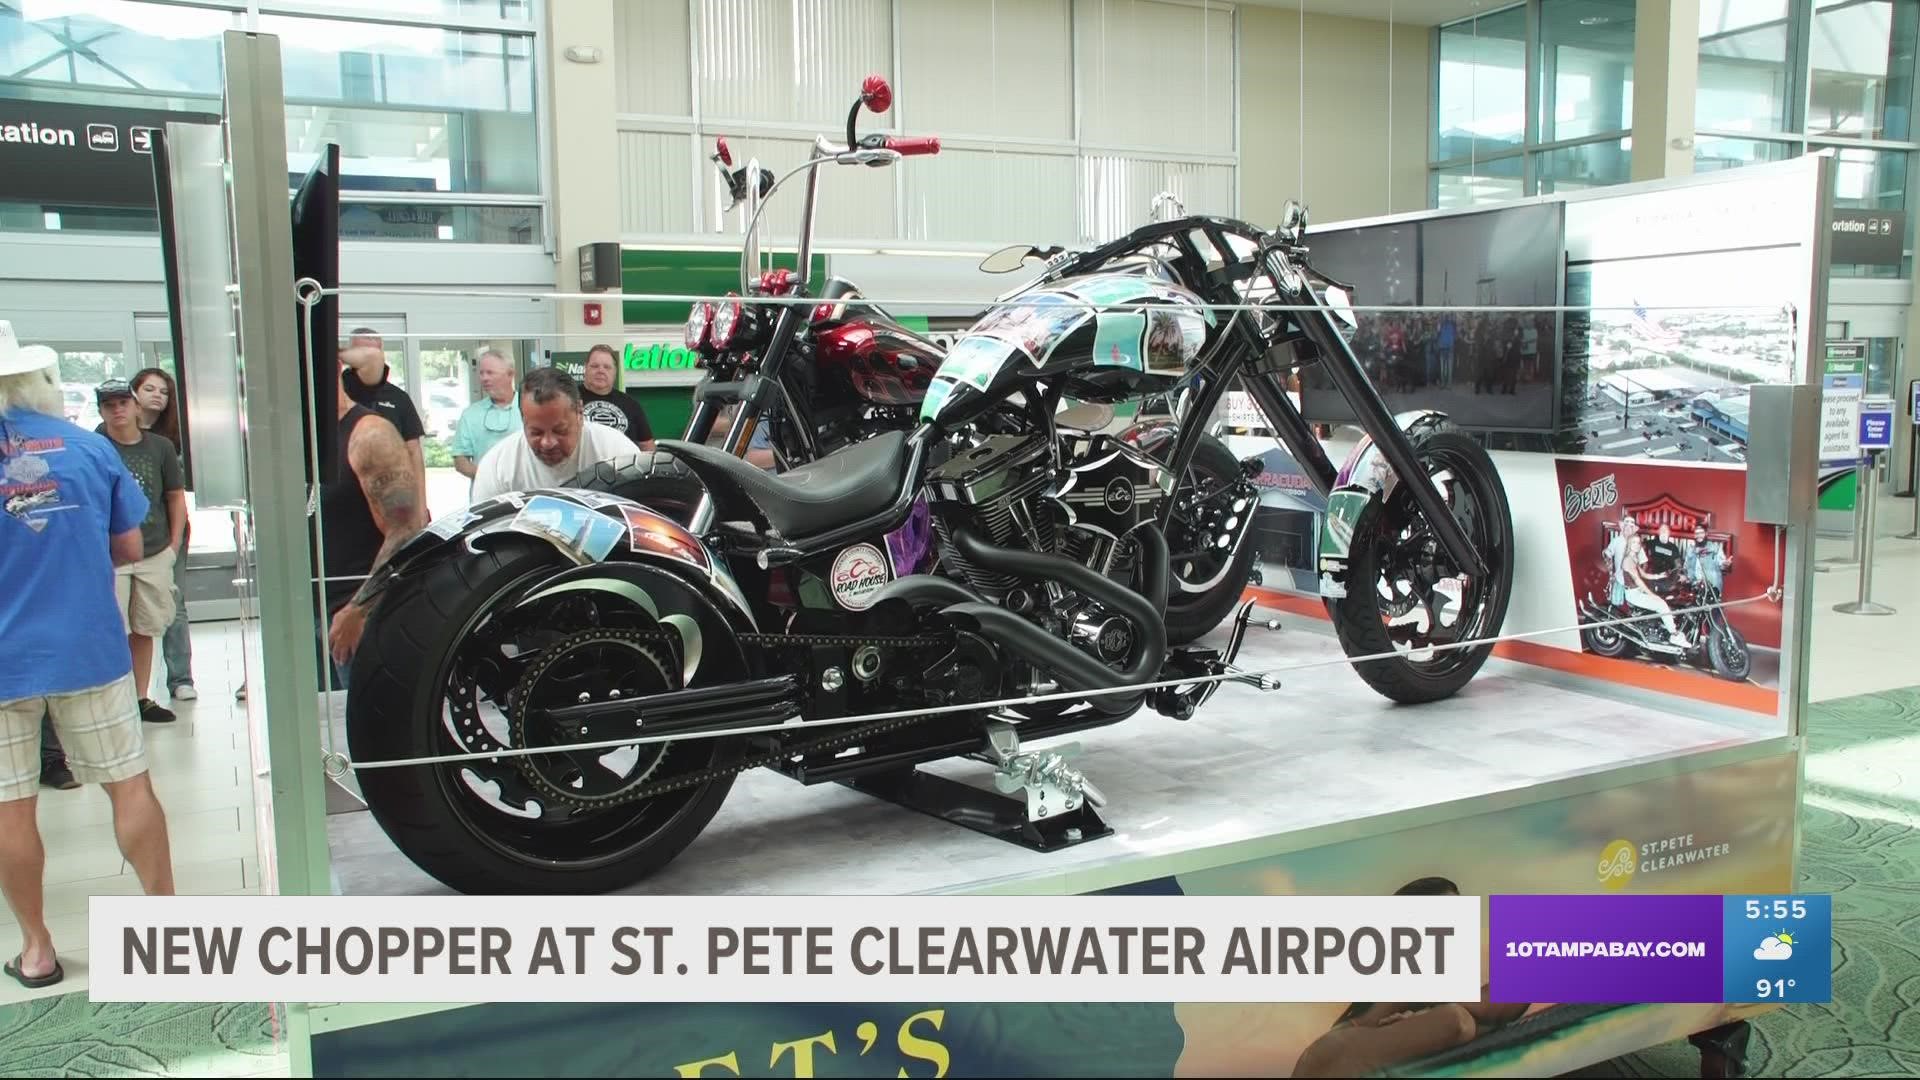 The custom motorcycle will showcase images of locations around the St. Petersburg and Clearwater area.